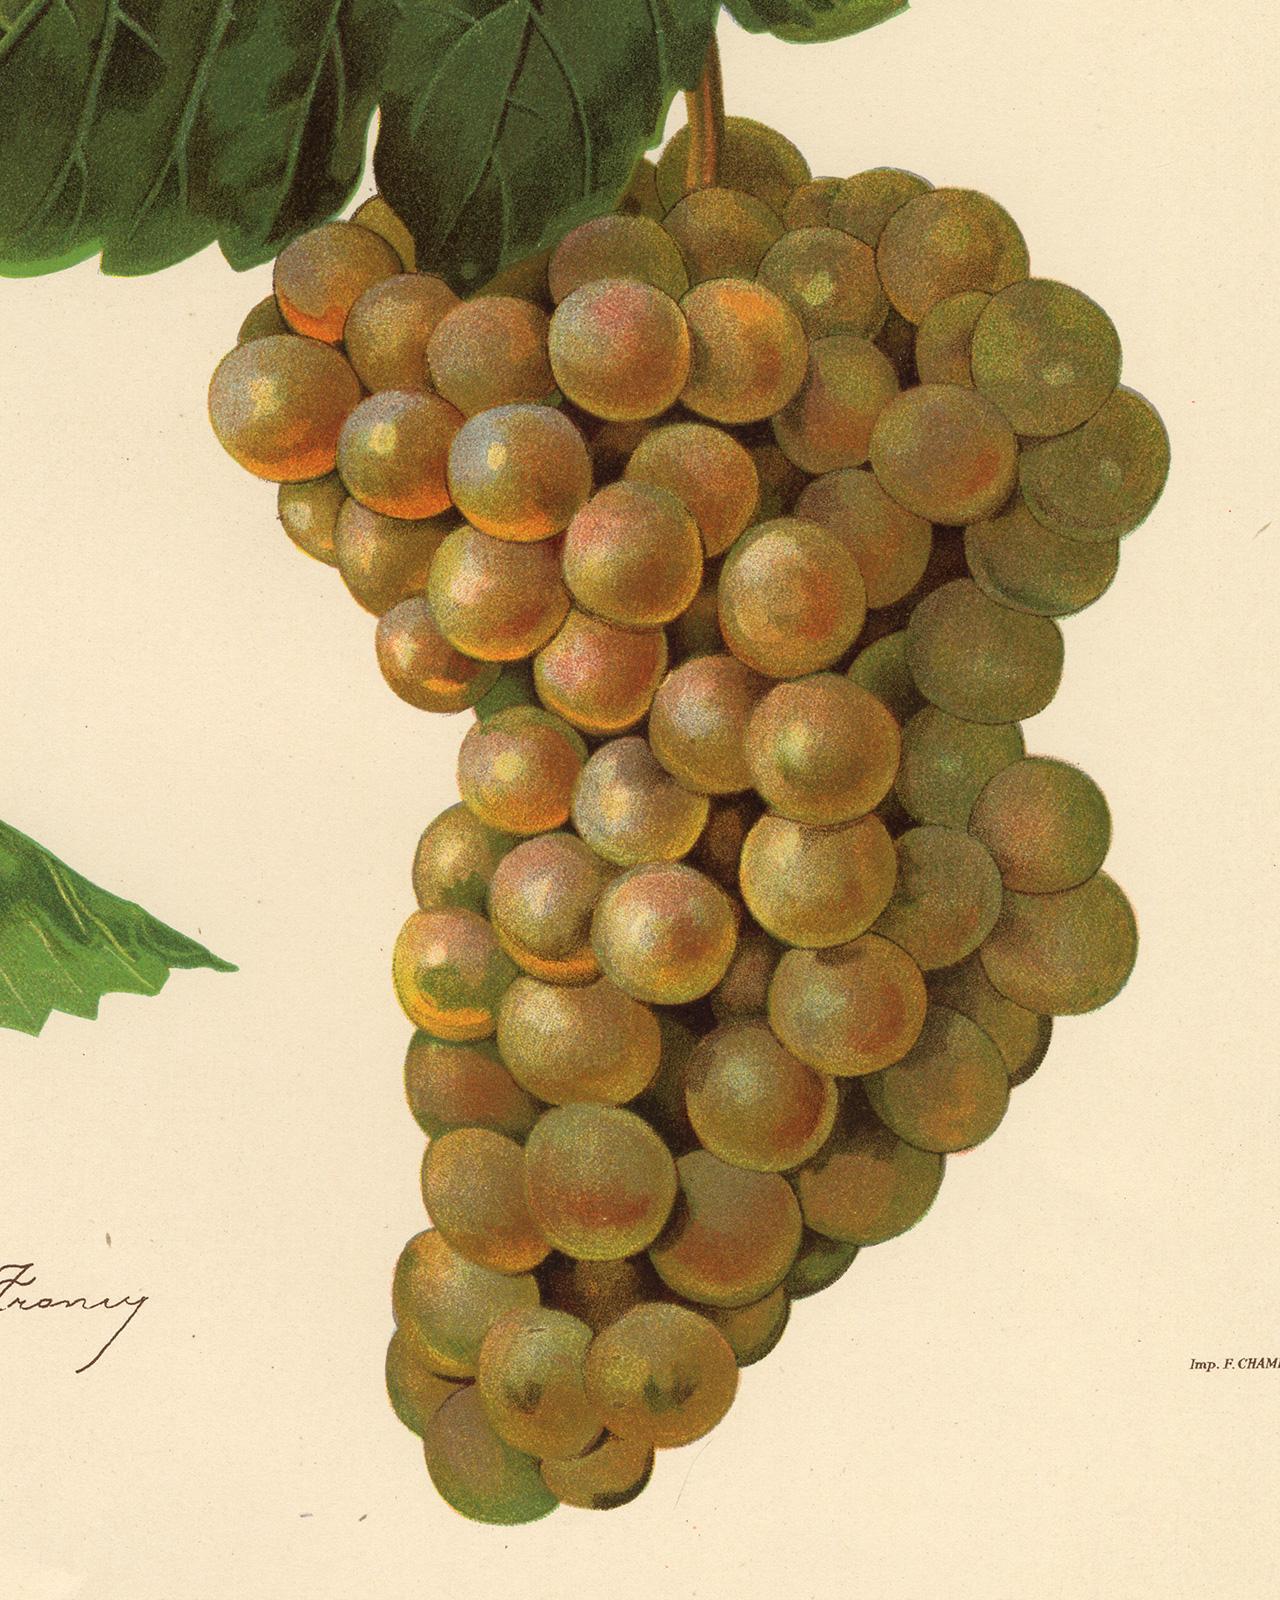 The Jean grape - from Ampelography by Vermorel - Lithograph - Early 20th century - Contemporary Print by Victor Vermorel